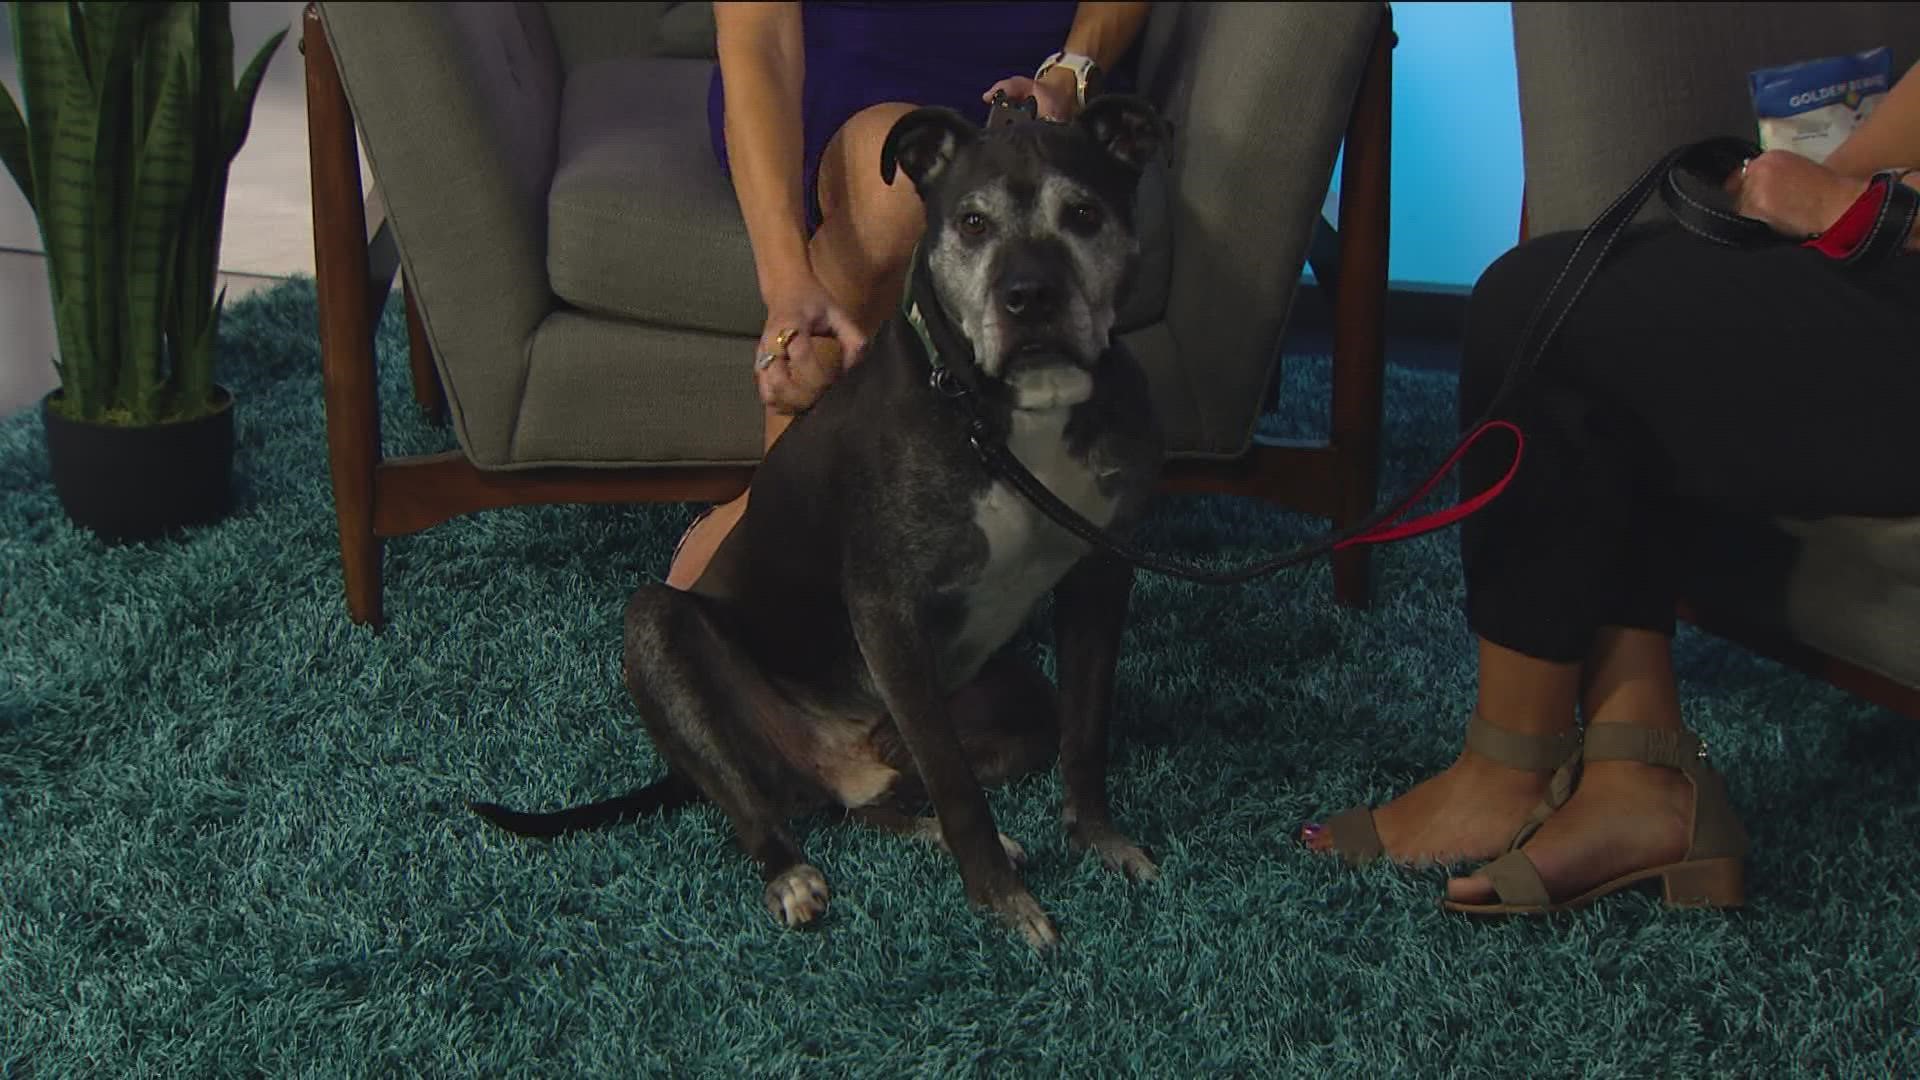 Kingsley the dog stops by the studio, plus what the benefits are of adopting a senior pet. Visit www.idahohumanesociety.org for more information.